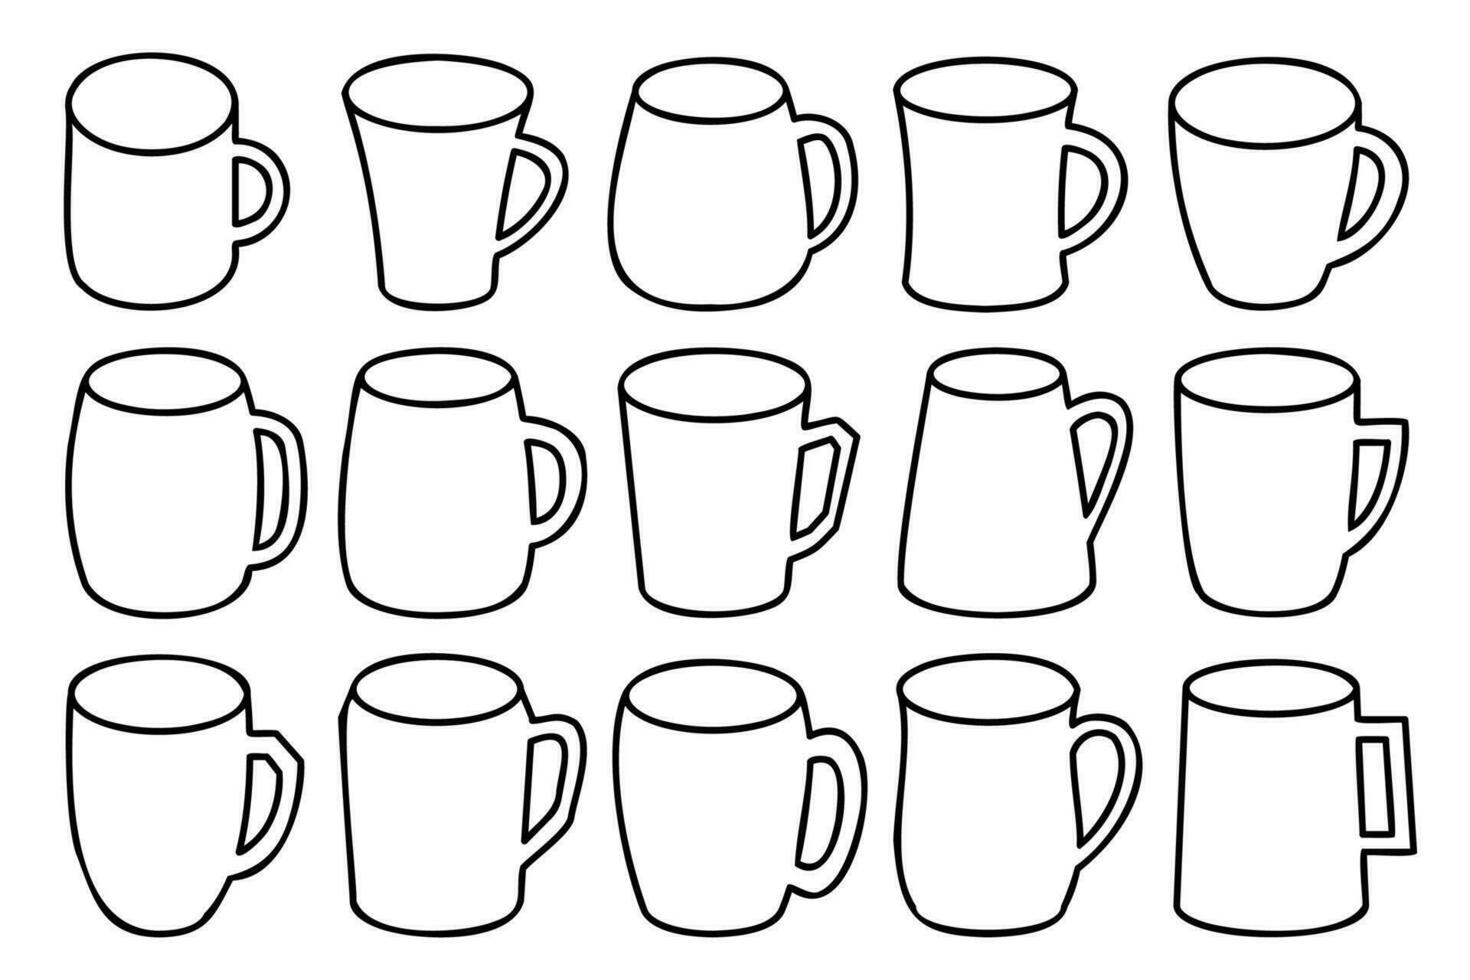 Line art mug set. Collection of different mugs with black thin line. Outline cups, mugs outline illustrations. vector